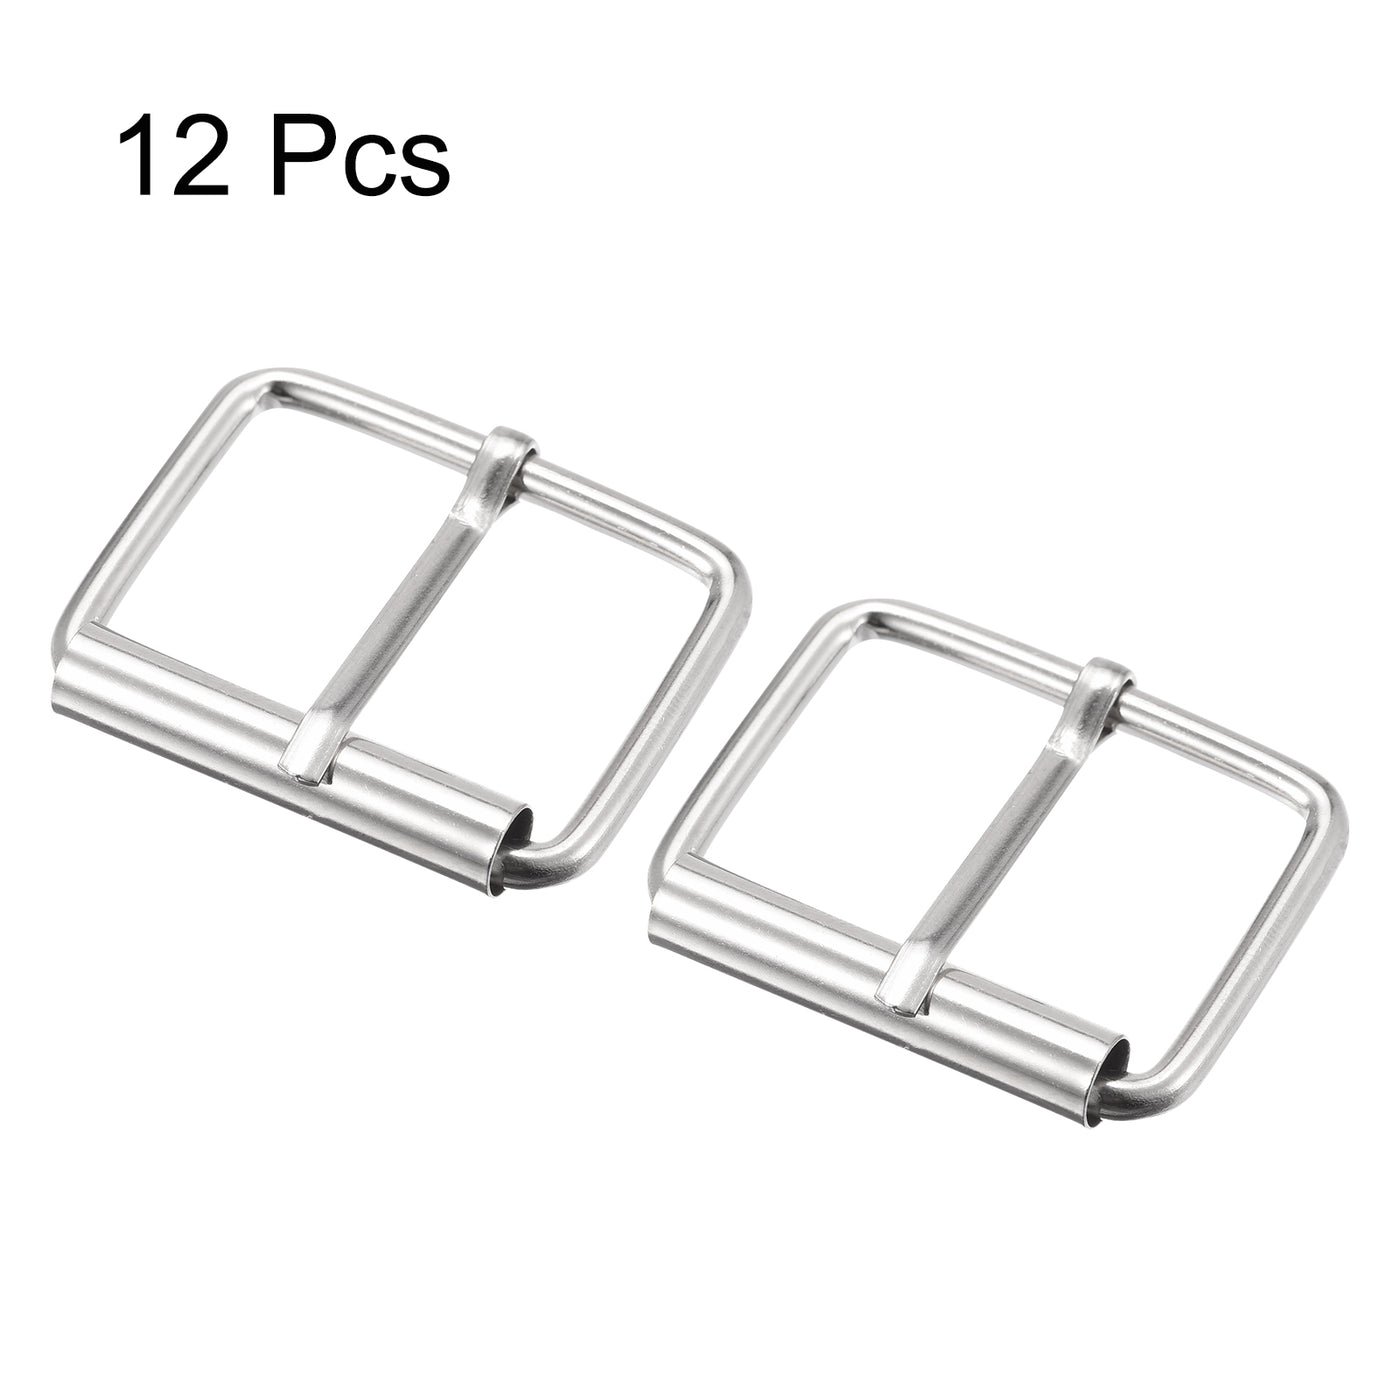 uxcell Uxcell 35mm(1.38") Metal Roller Buckles for Belts Bags Straps DIY Silver Tone 12pcs